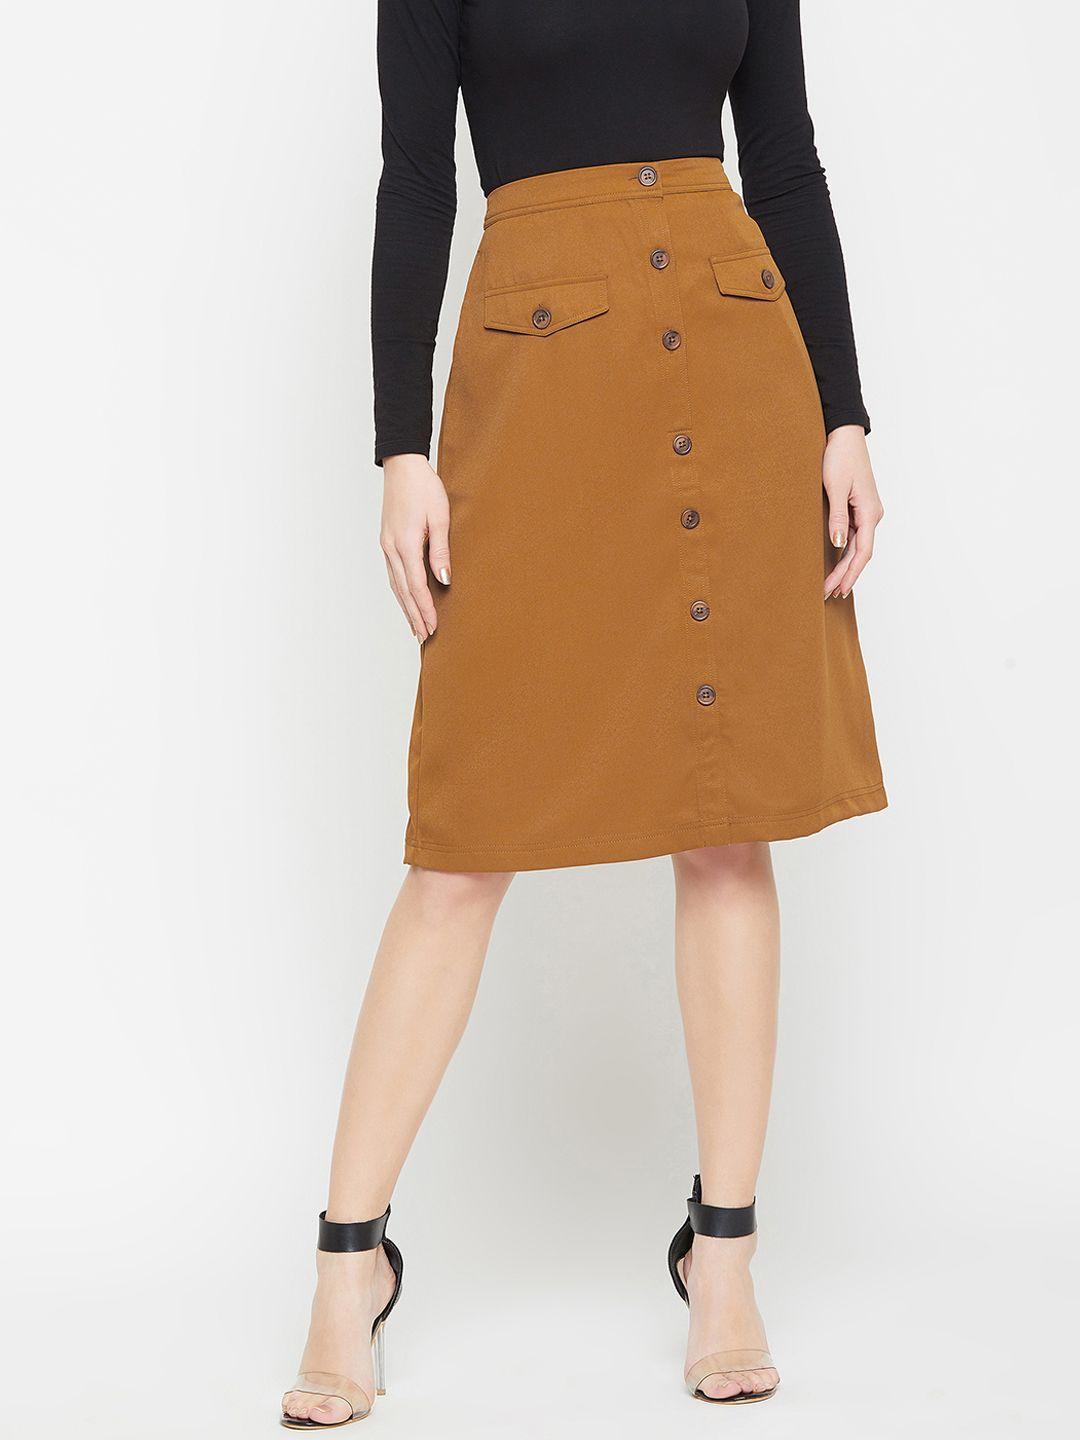 Marie Claire Brown A-Line Knee-Length Skirt